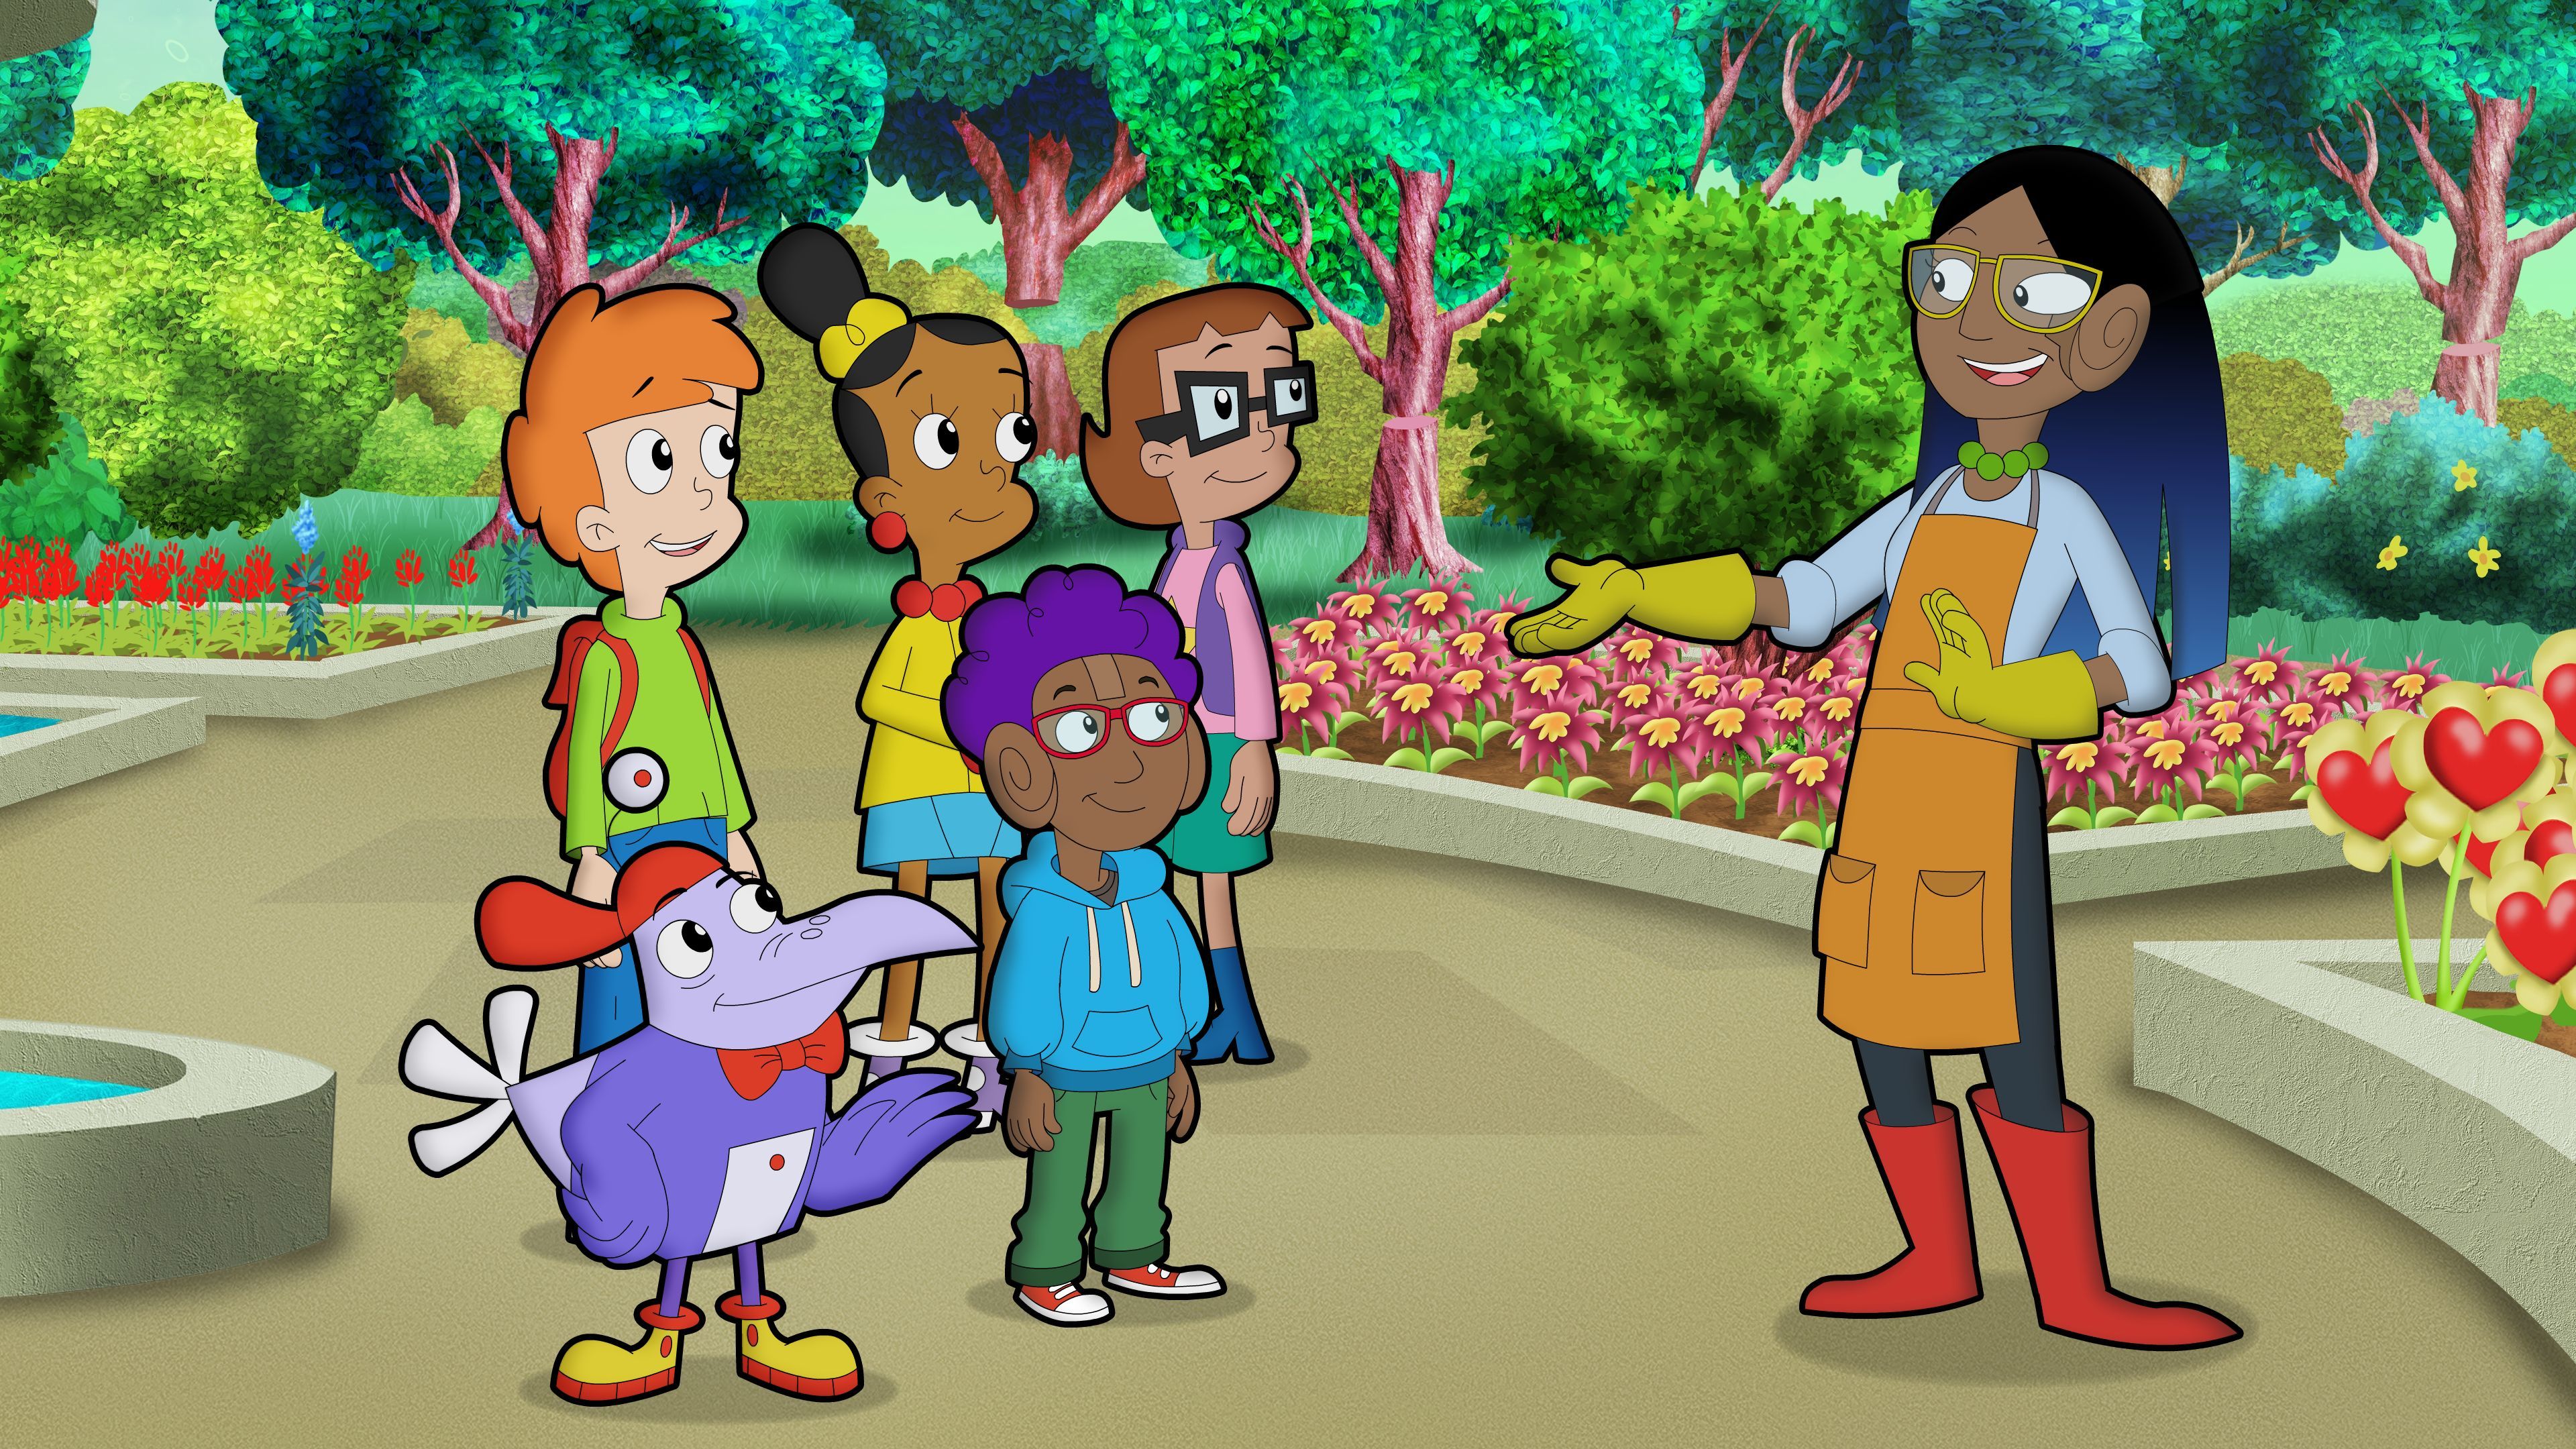 Cyberchase, Watch All New Episodes!